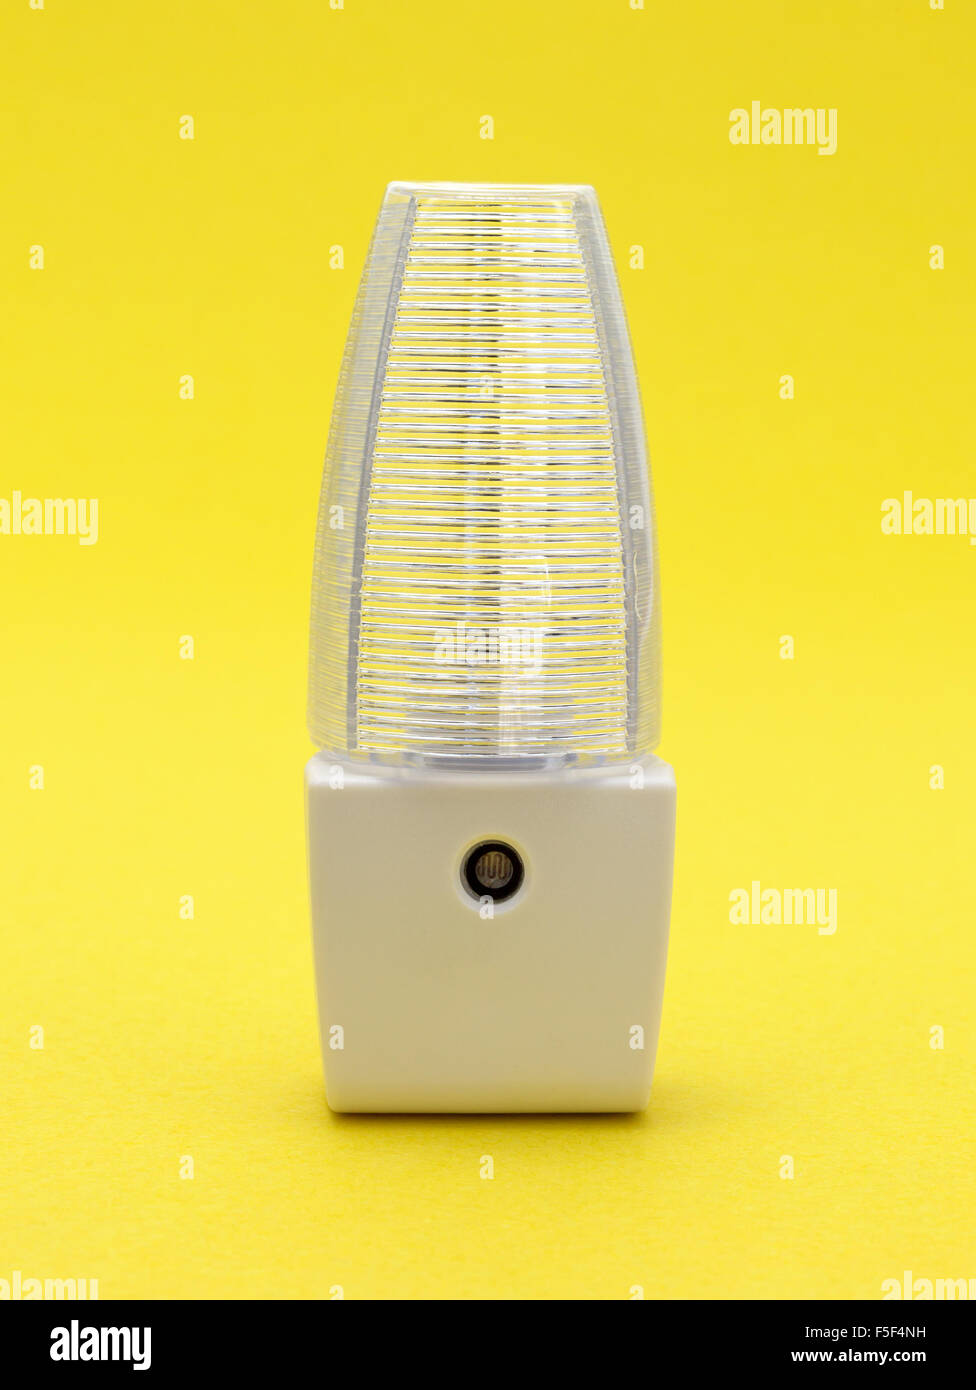 A new generic LED night light that turns on automatically in darkness on a yellow background. Stock Photo